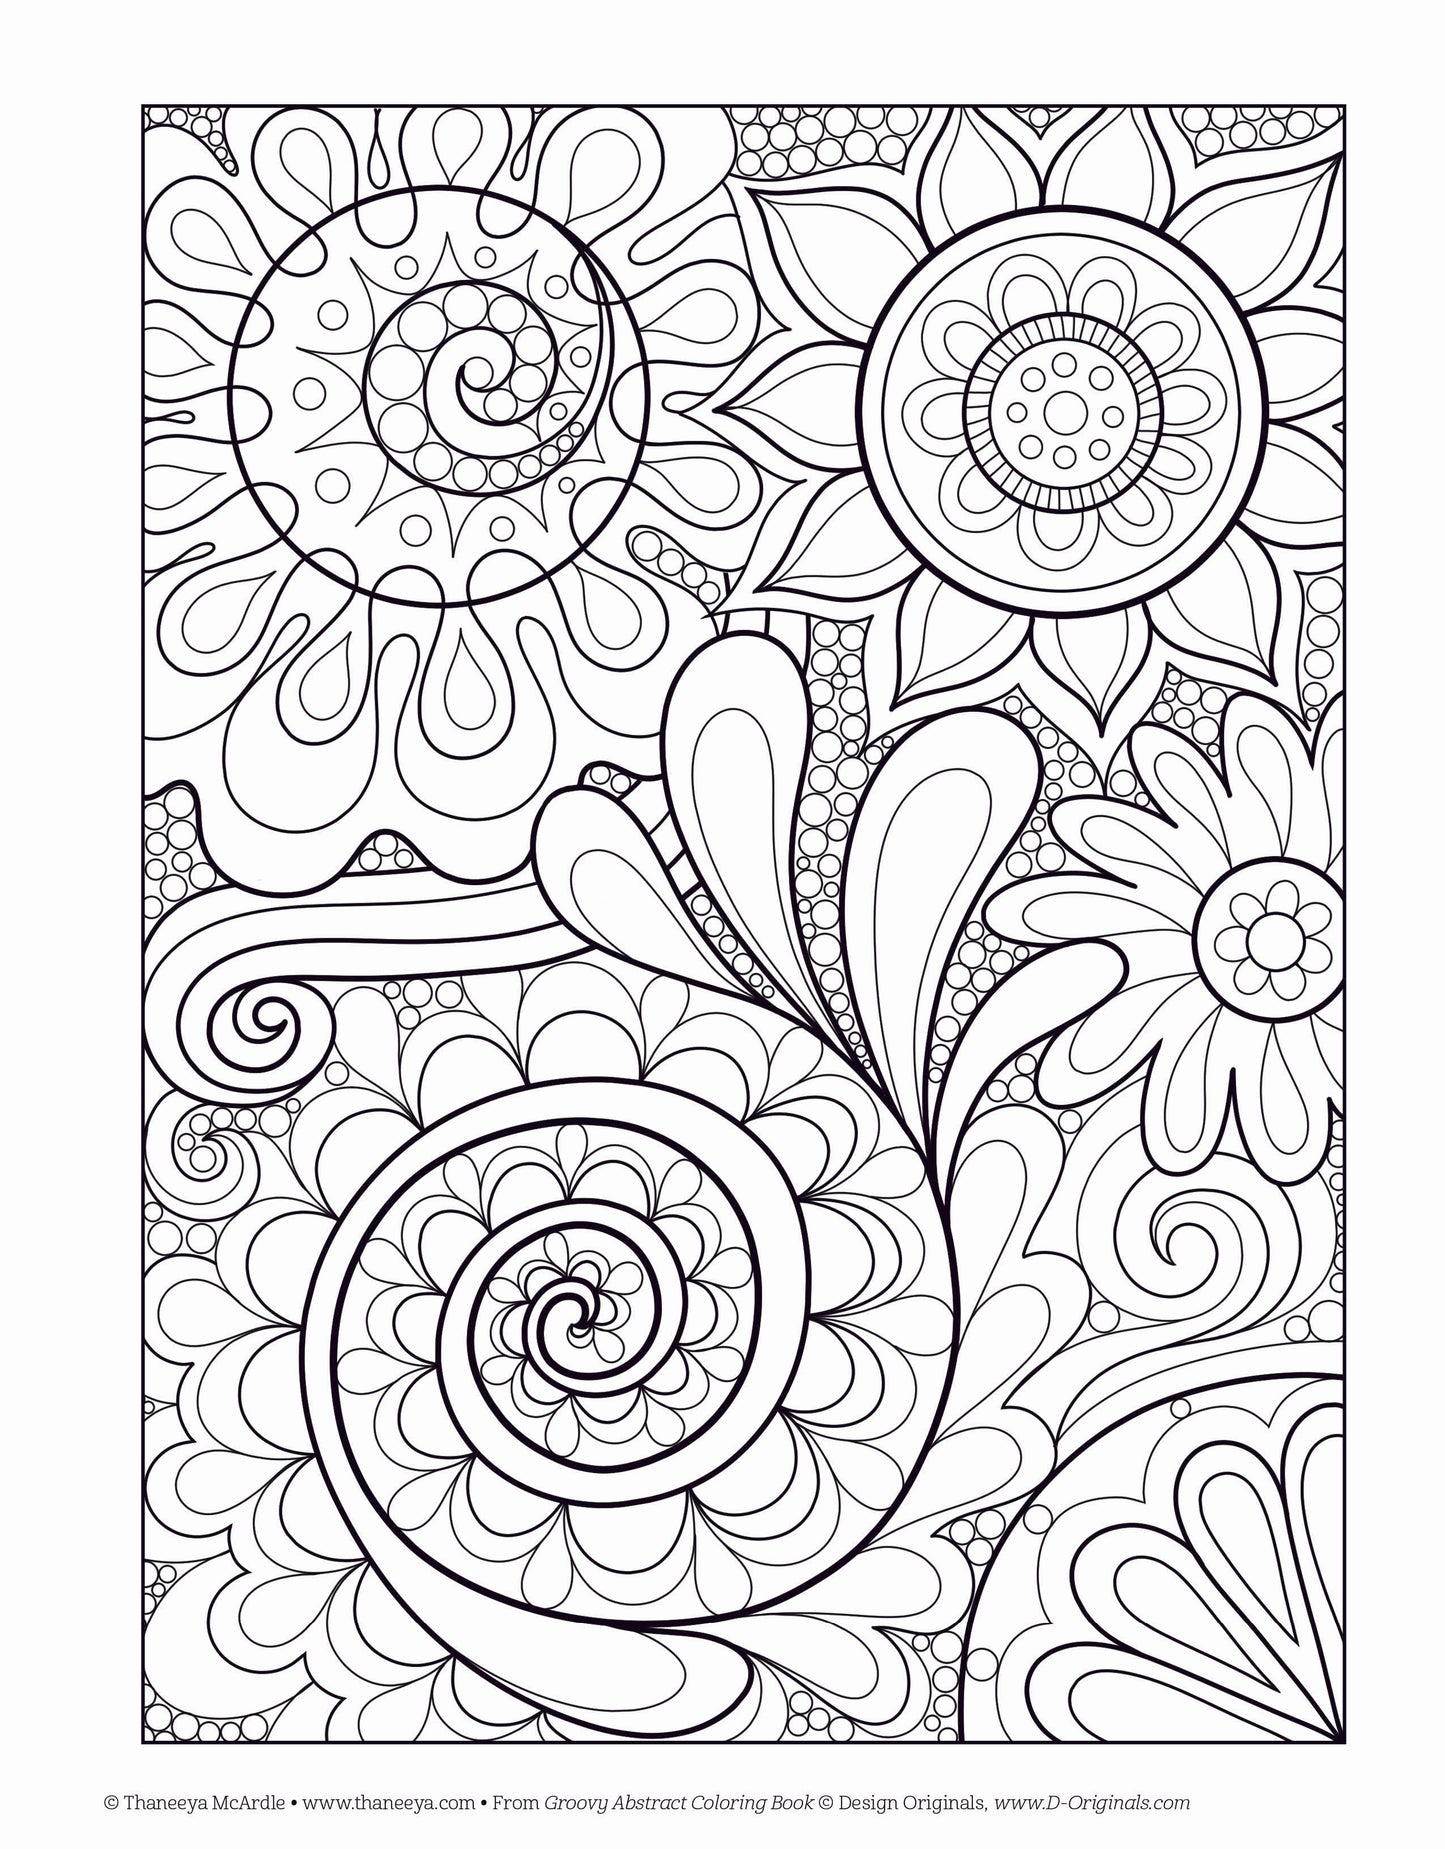 Groovy Abstract Coloring Book